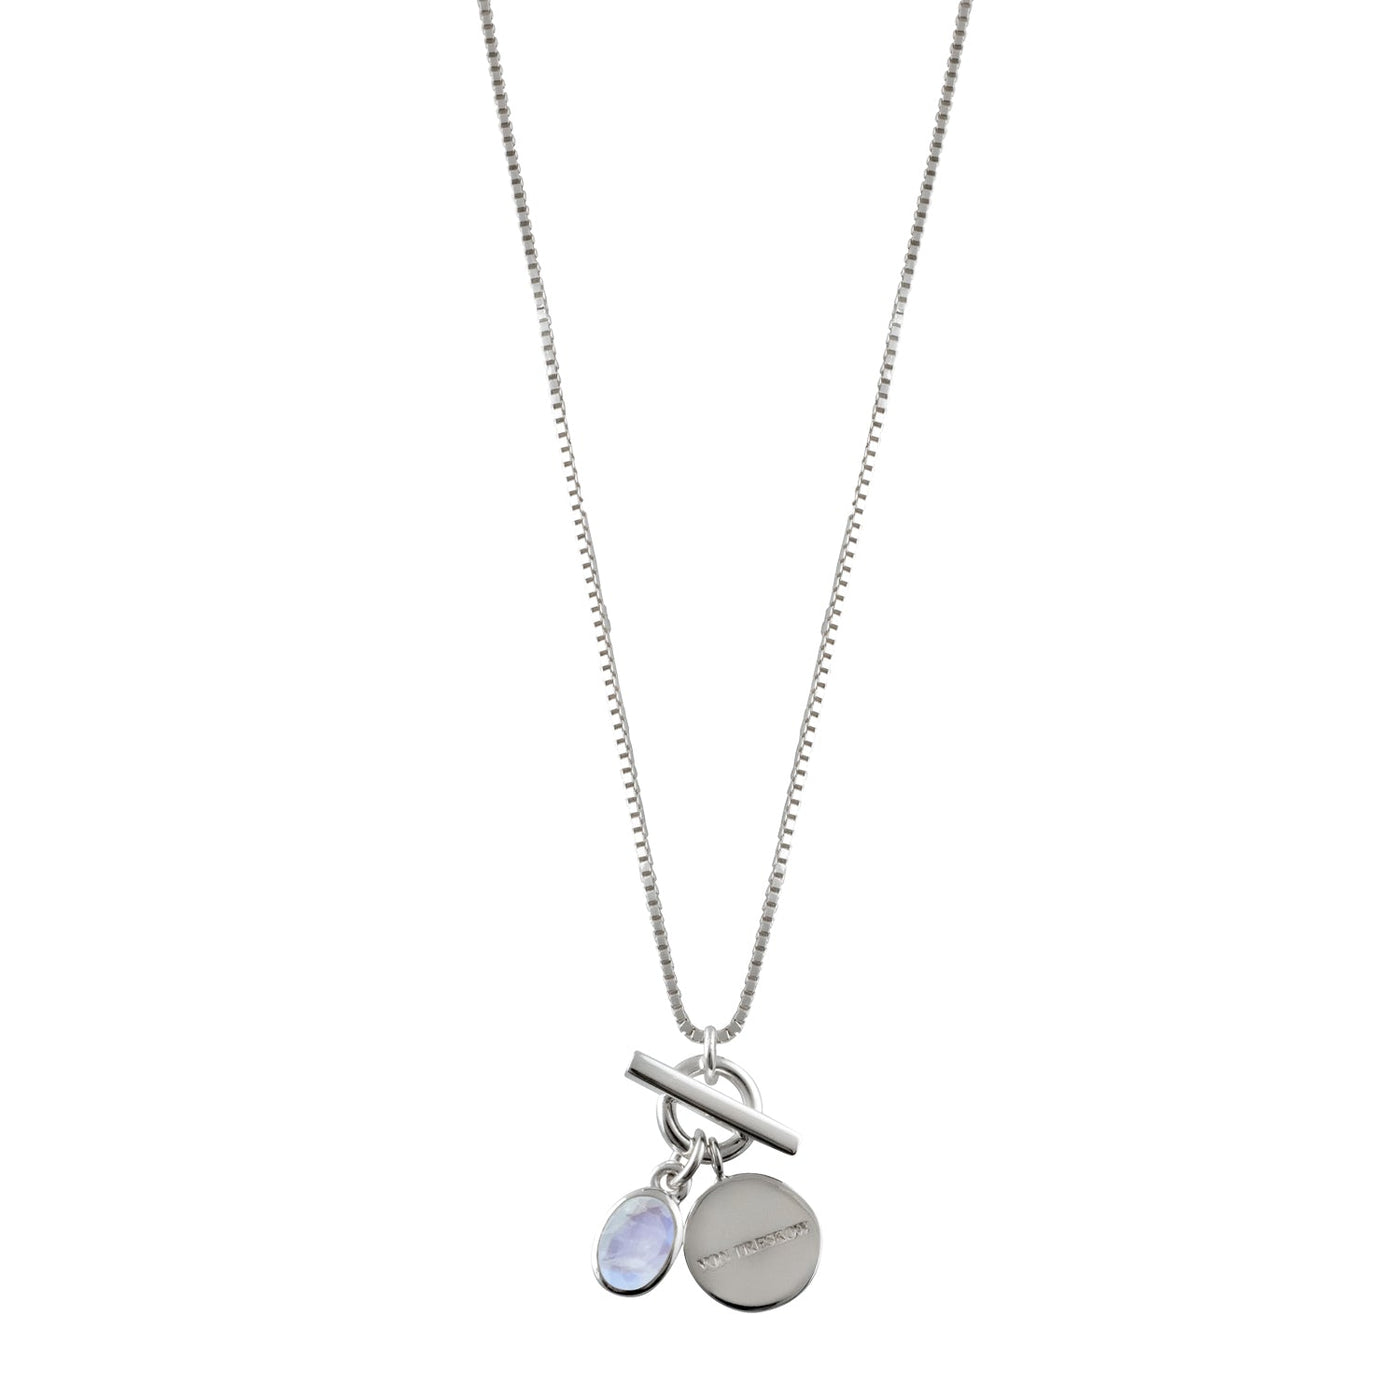 Von Treskow Box chain necklace with toggle and moonstone